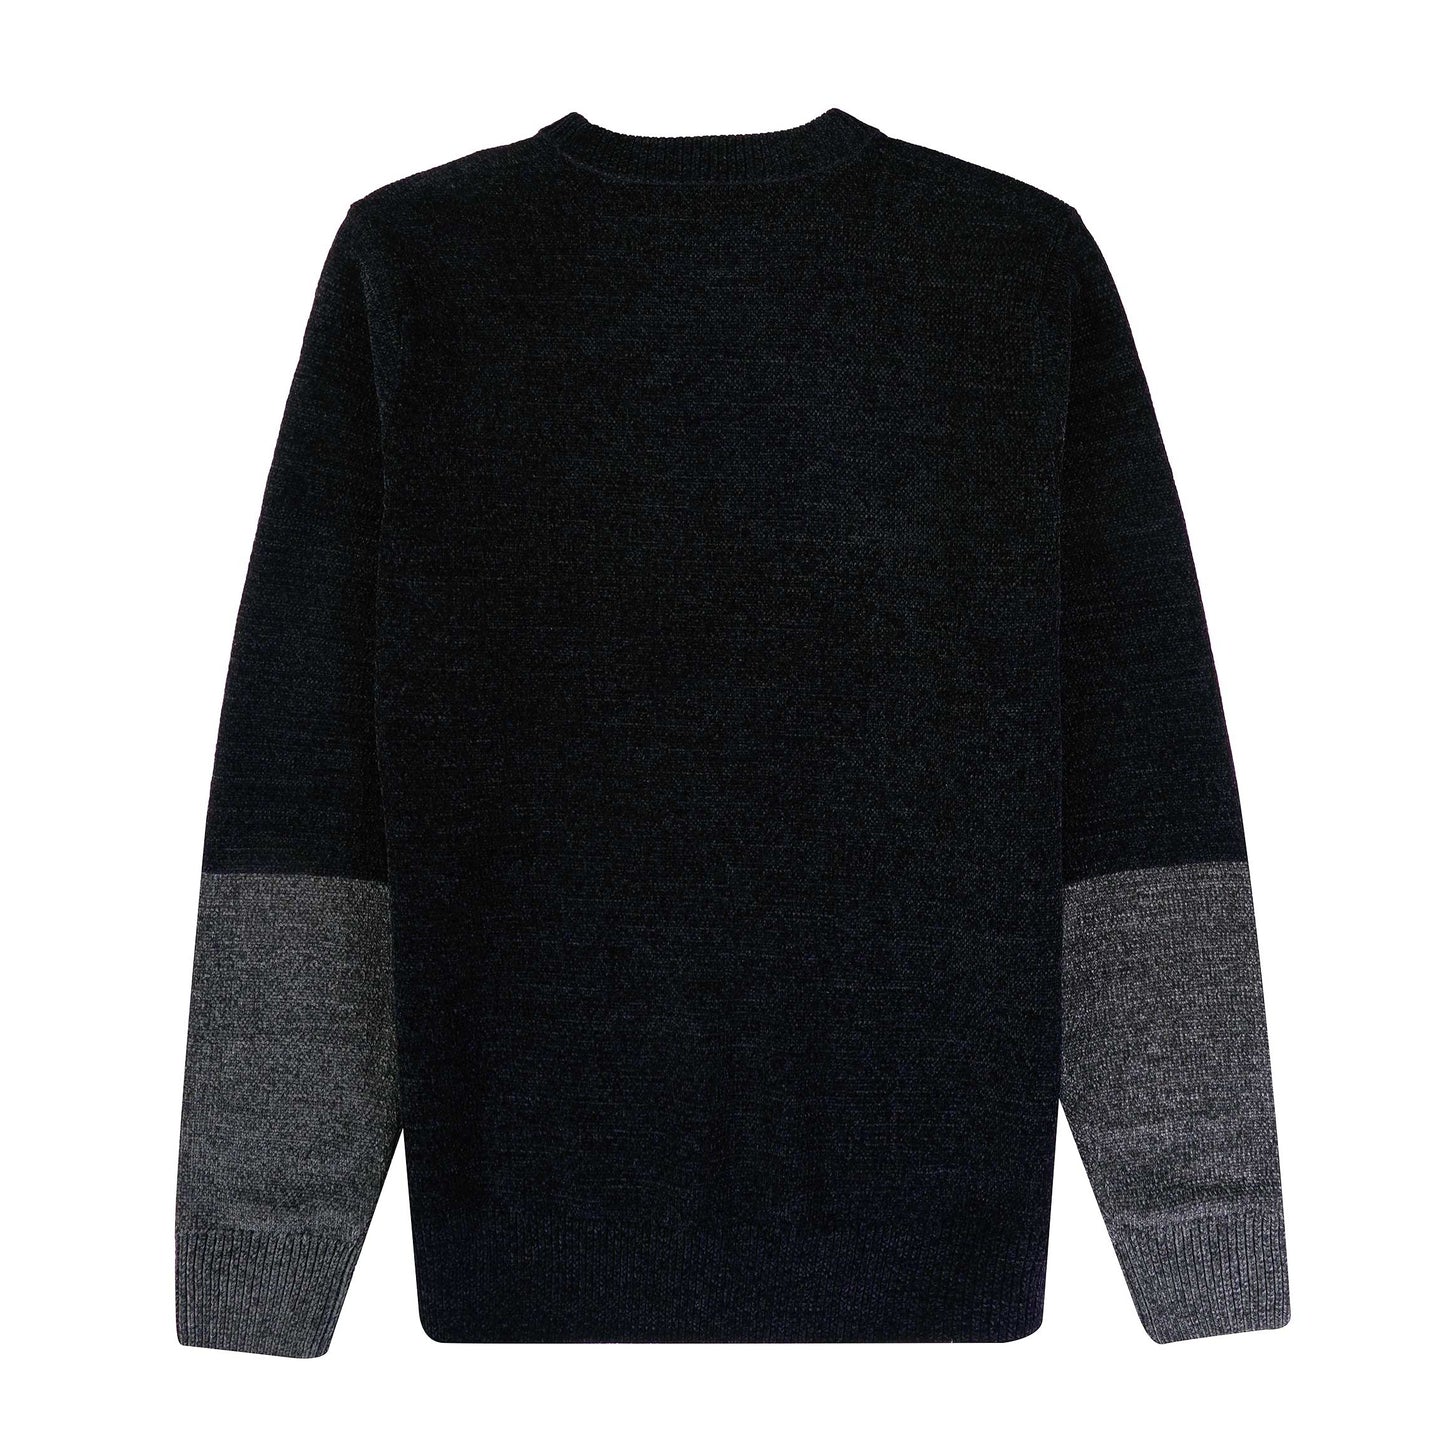 Fred Perry Chenille Rib Jumper